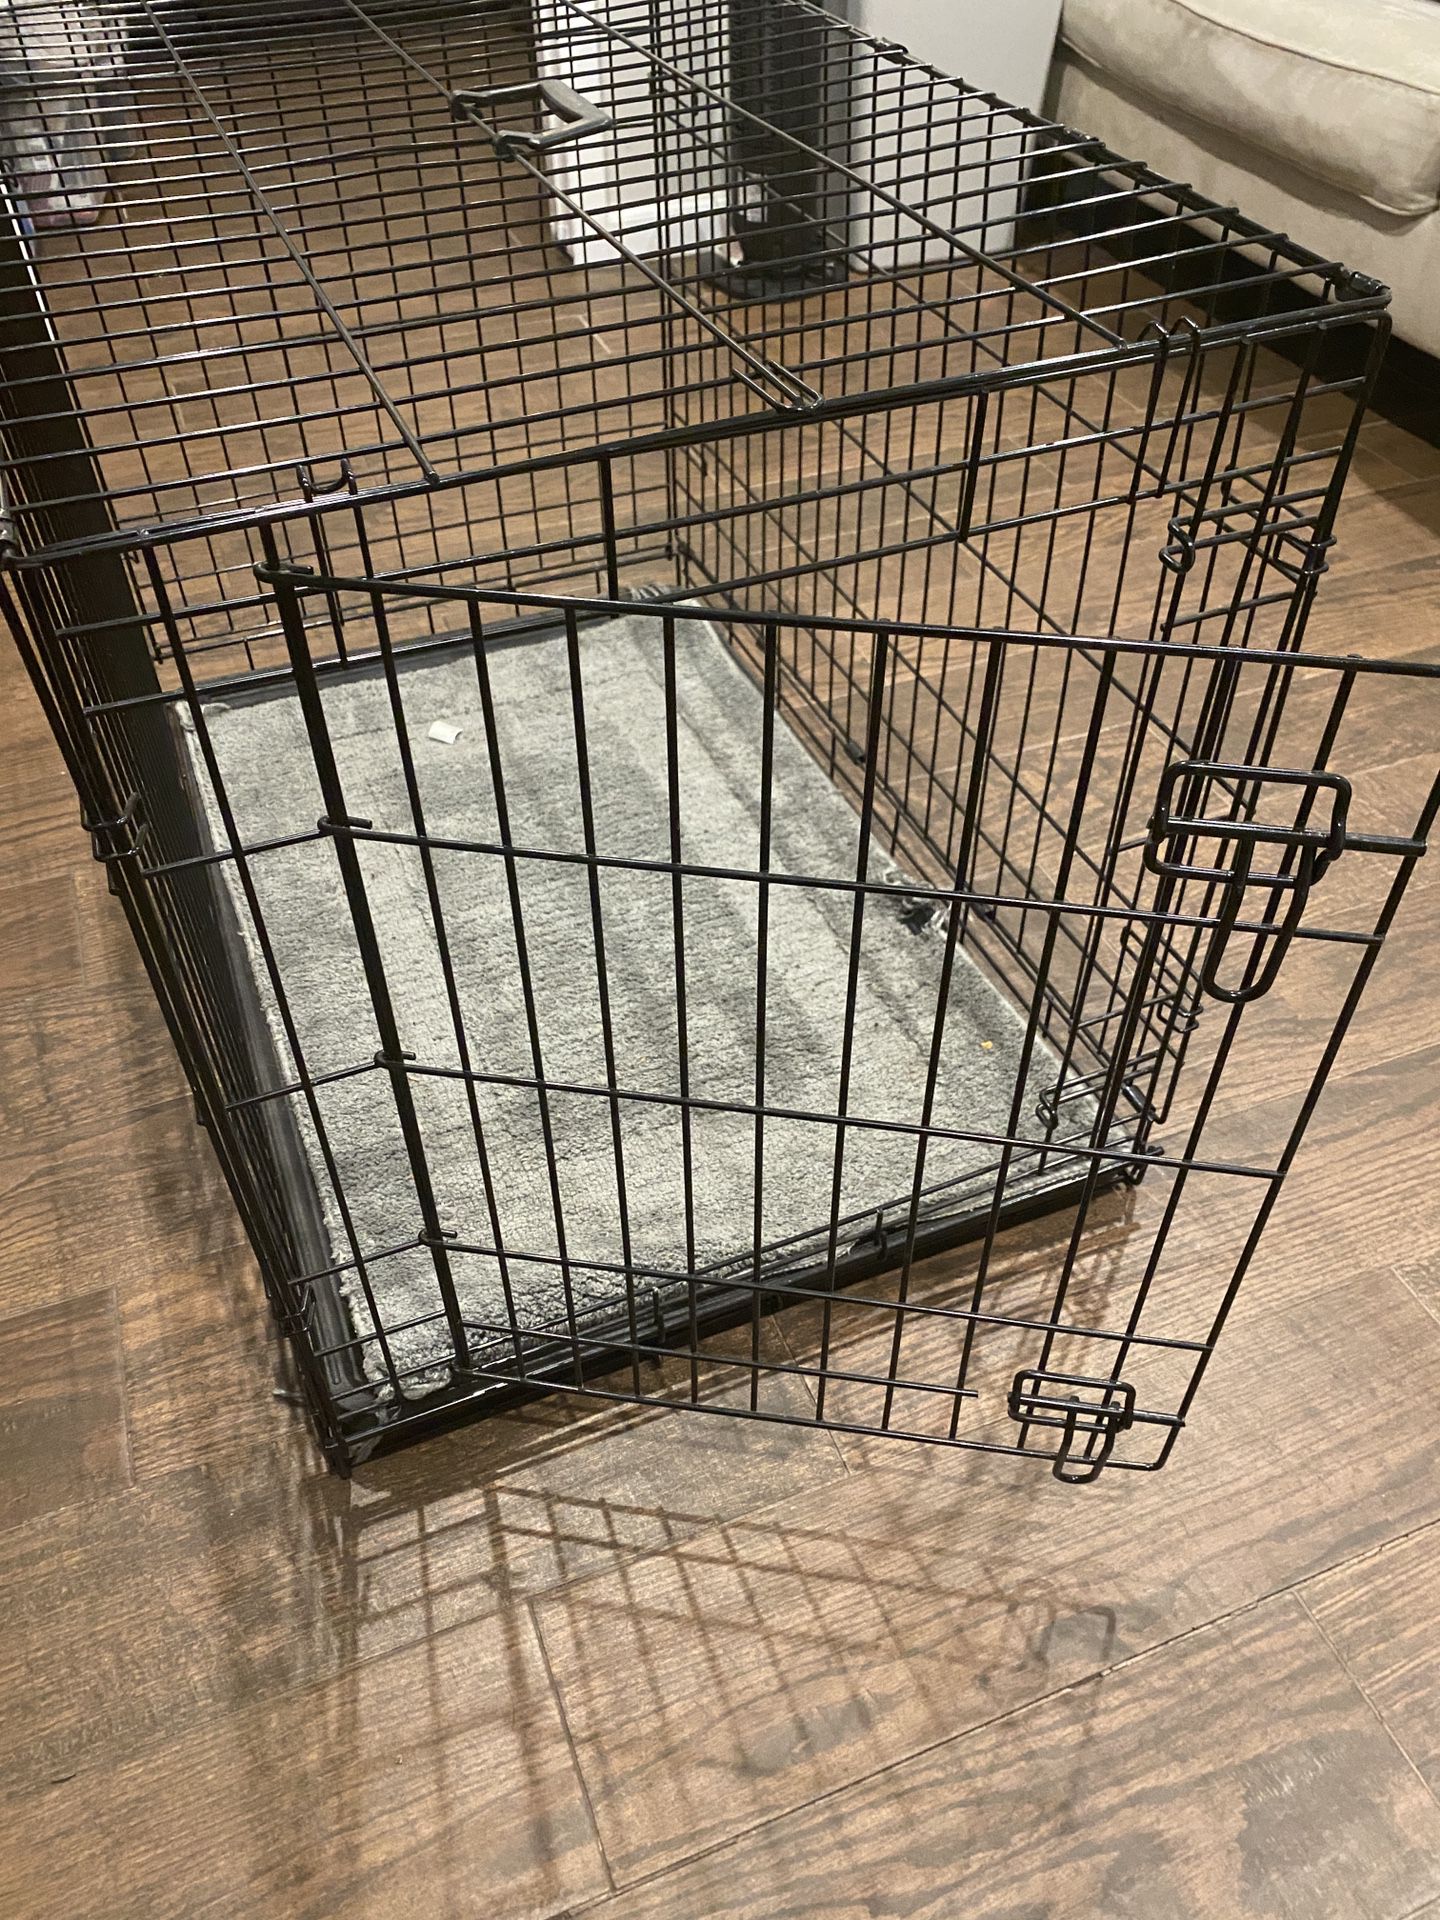 Dog kennel/crate 36”x22”